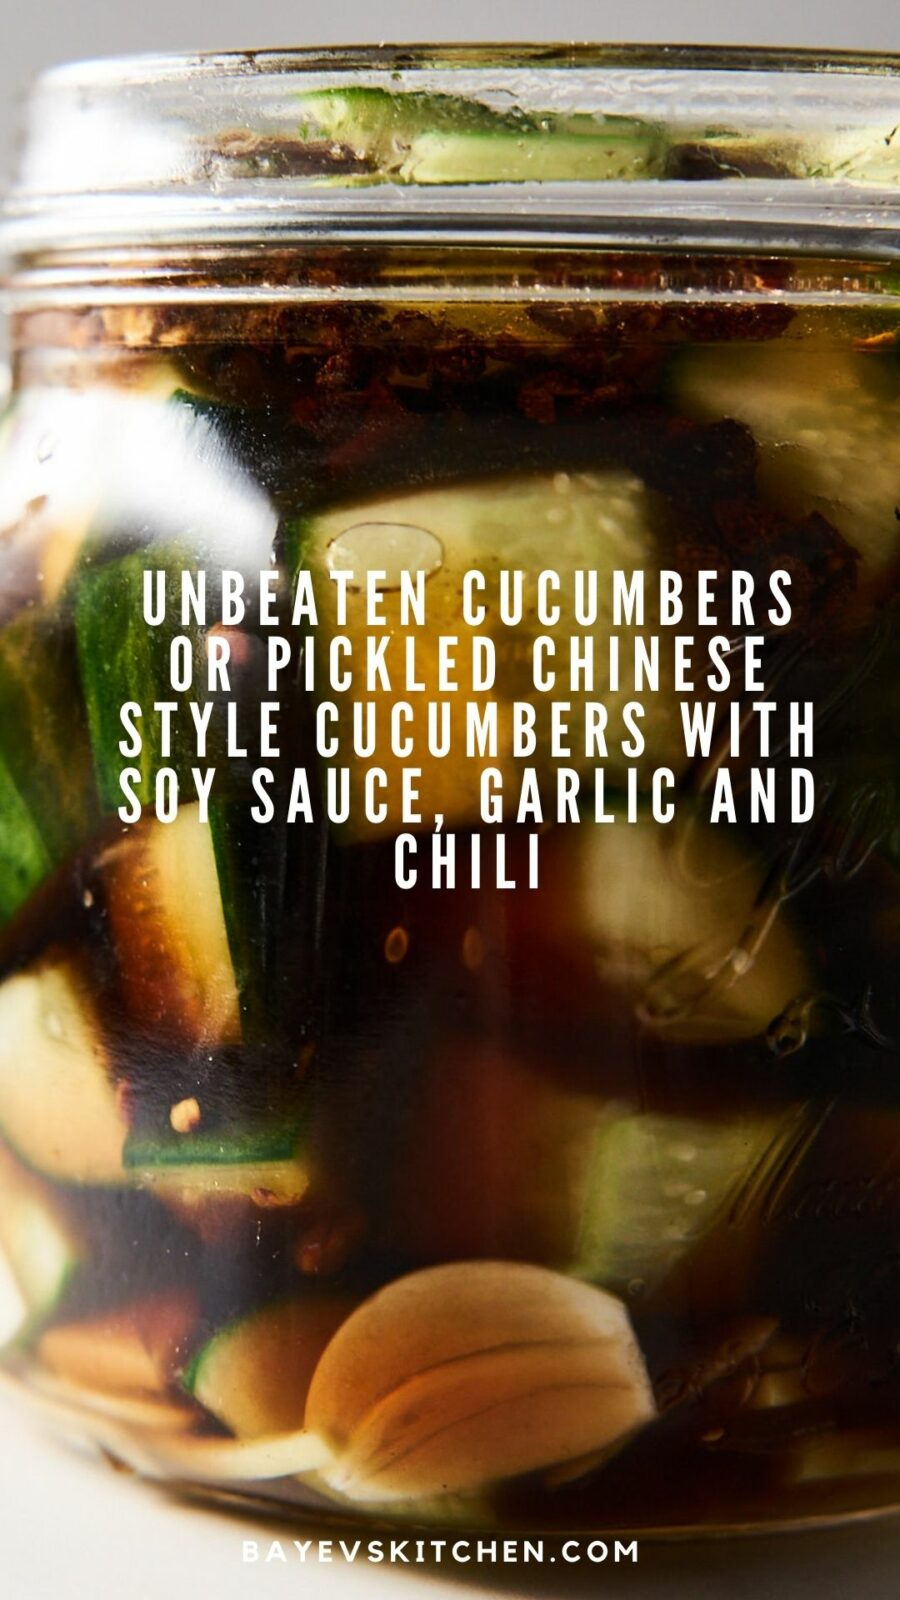 Unbeaten cucumbers or Pickled Chinese Style Cucumbers with soy sauce, garlic and chili by bayevskitchen.com